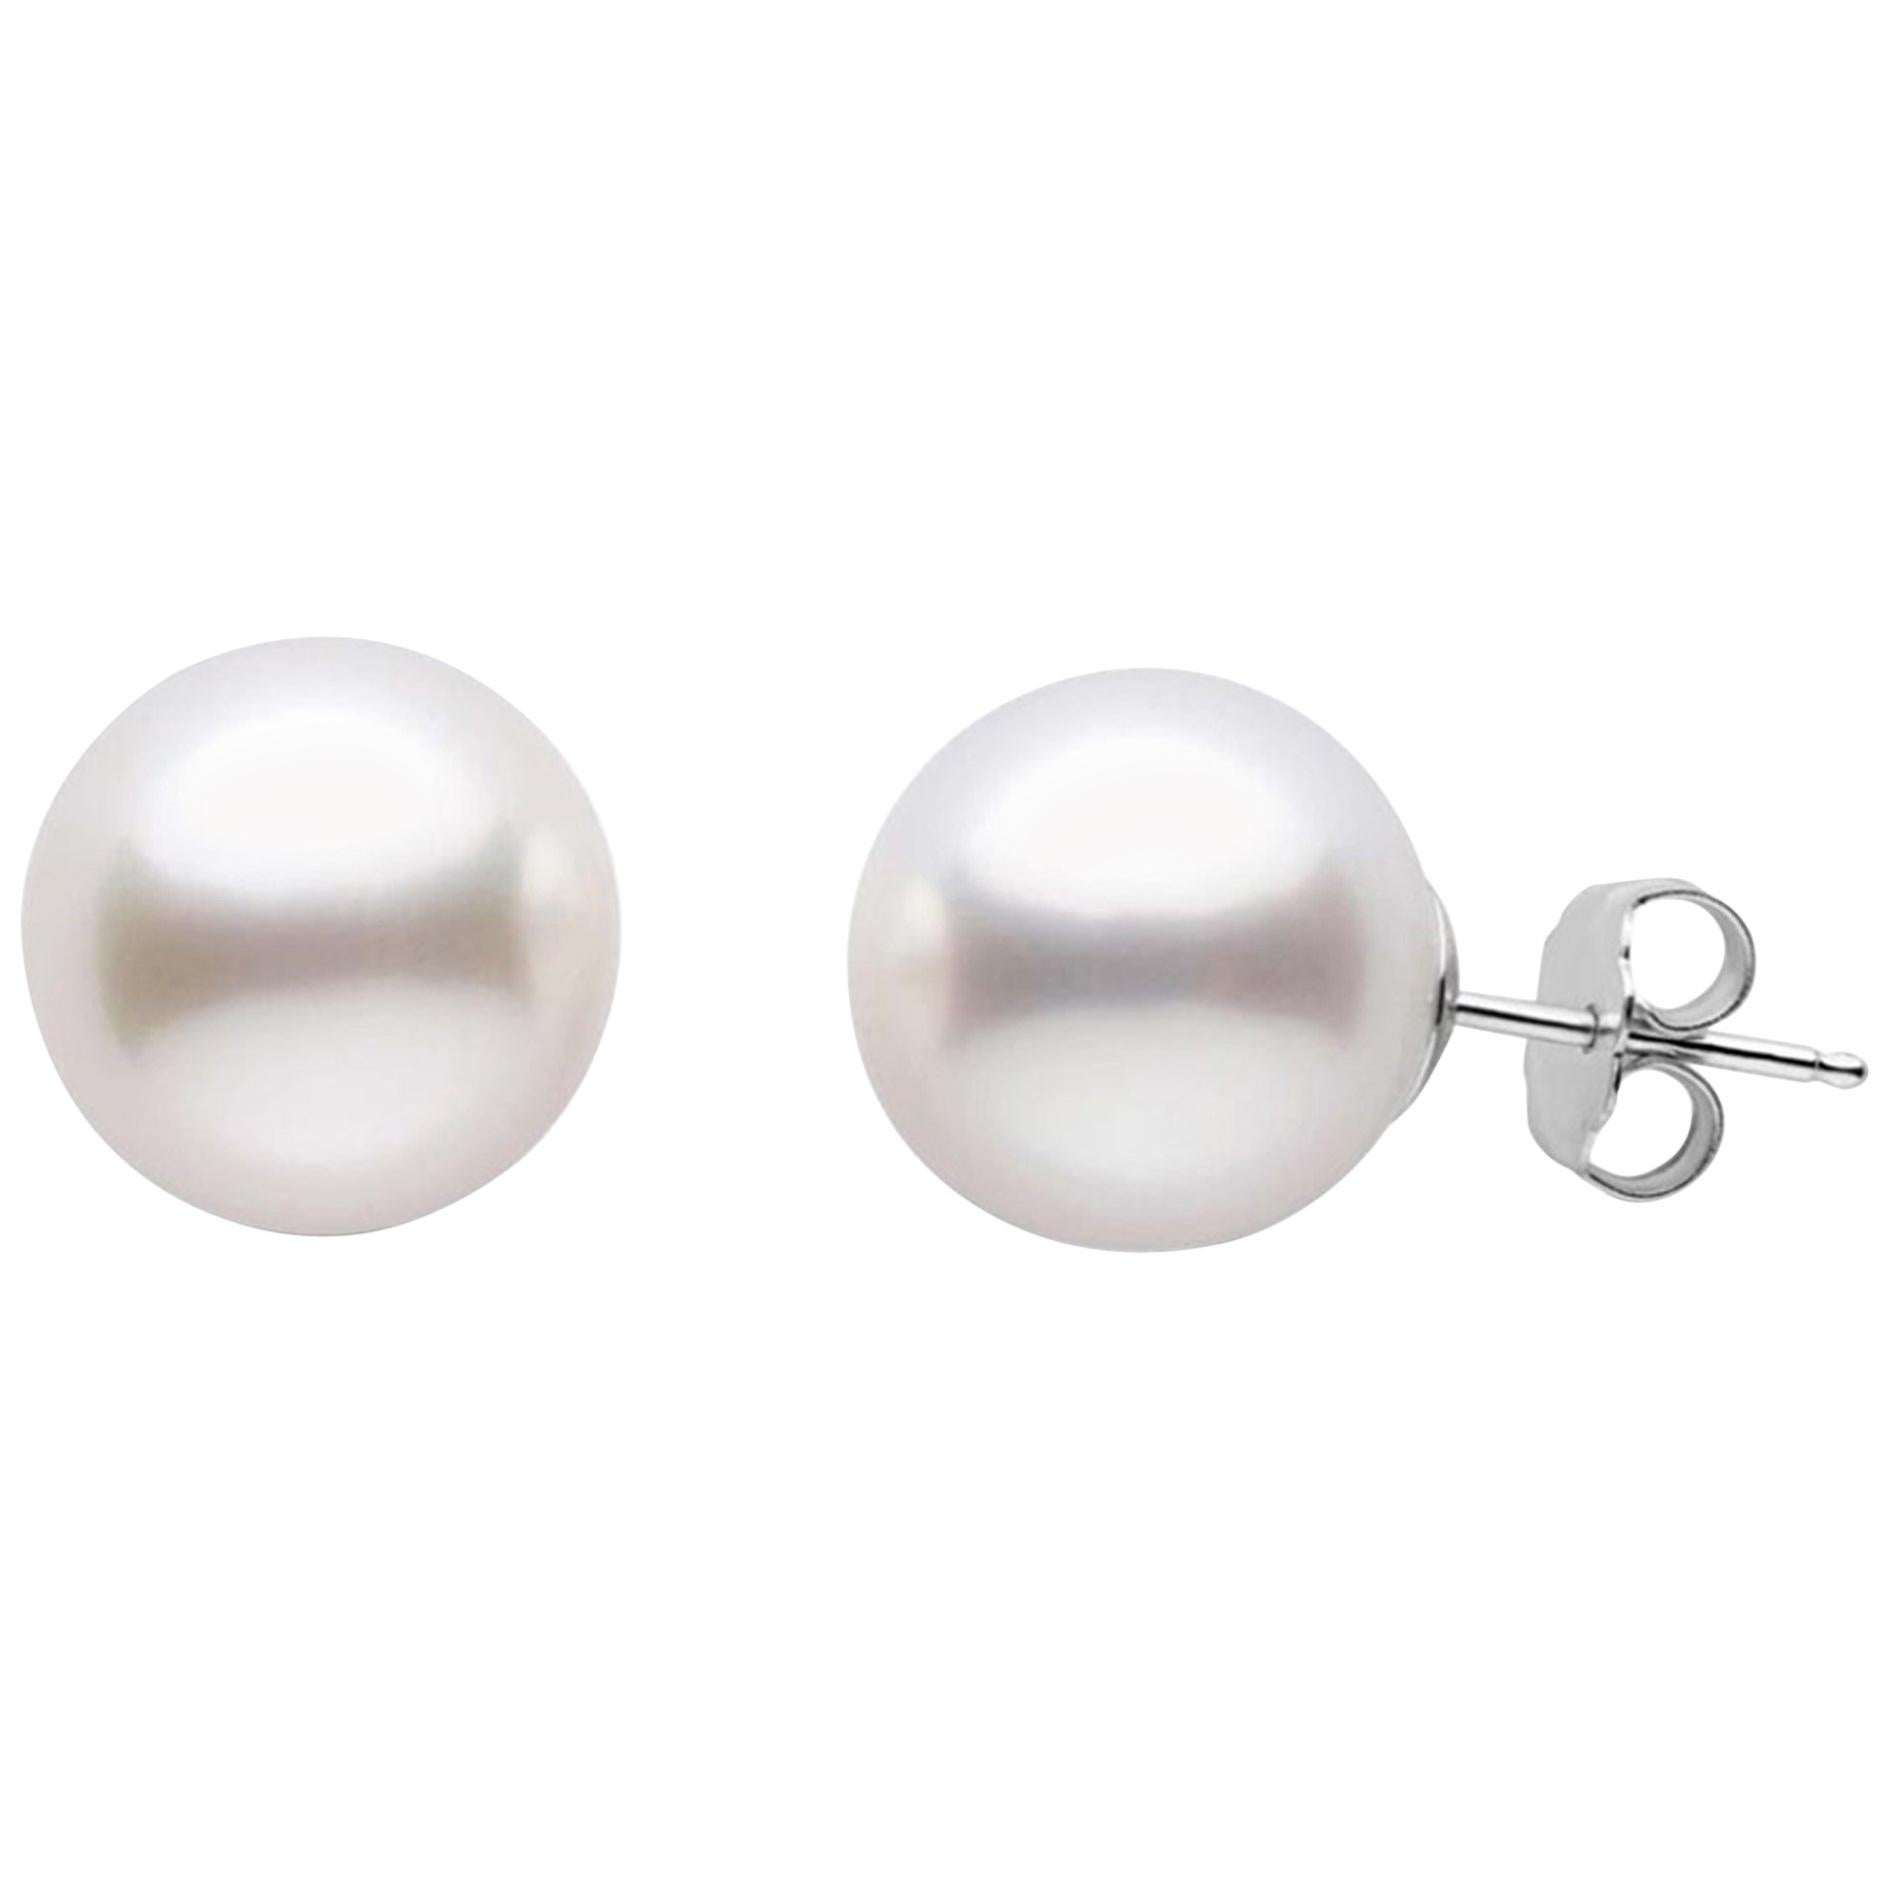 AAA Quality Round South Sea Cultured Pearl Earring Stud on 14 Karat White Gold For Sale